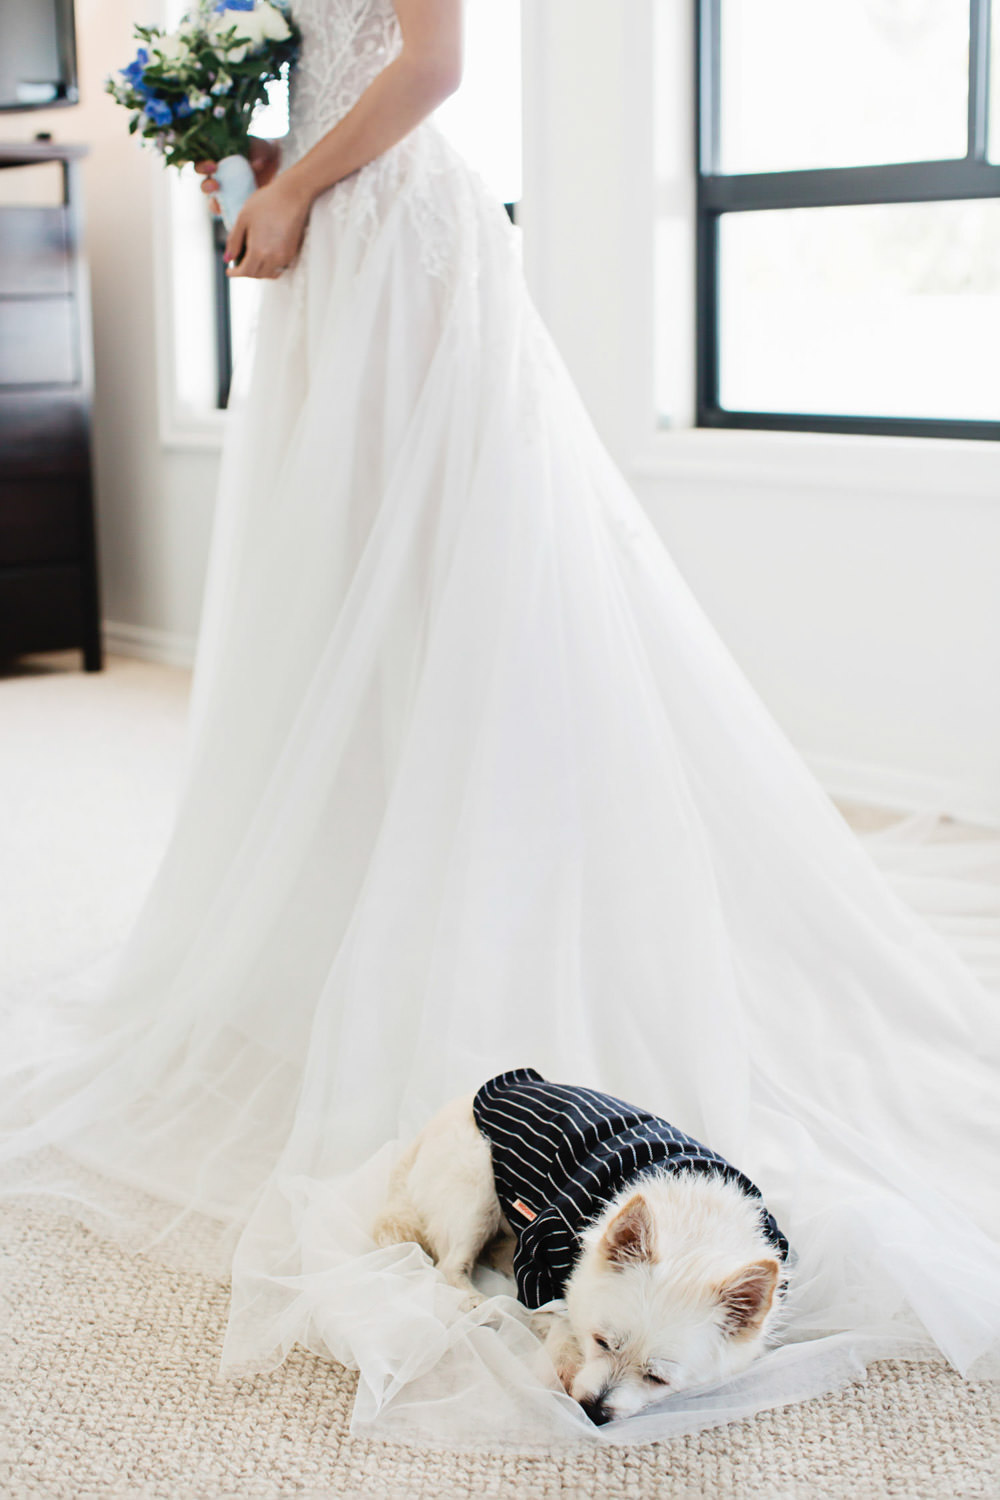 puppy-sleeping-on-brides-George-Wu-Dress-wedding-photography-packages-sanctuary-cove